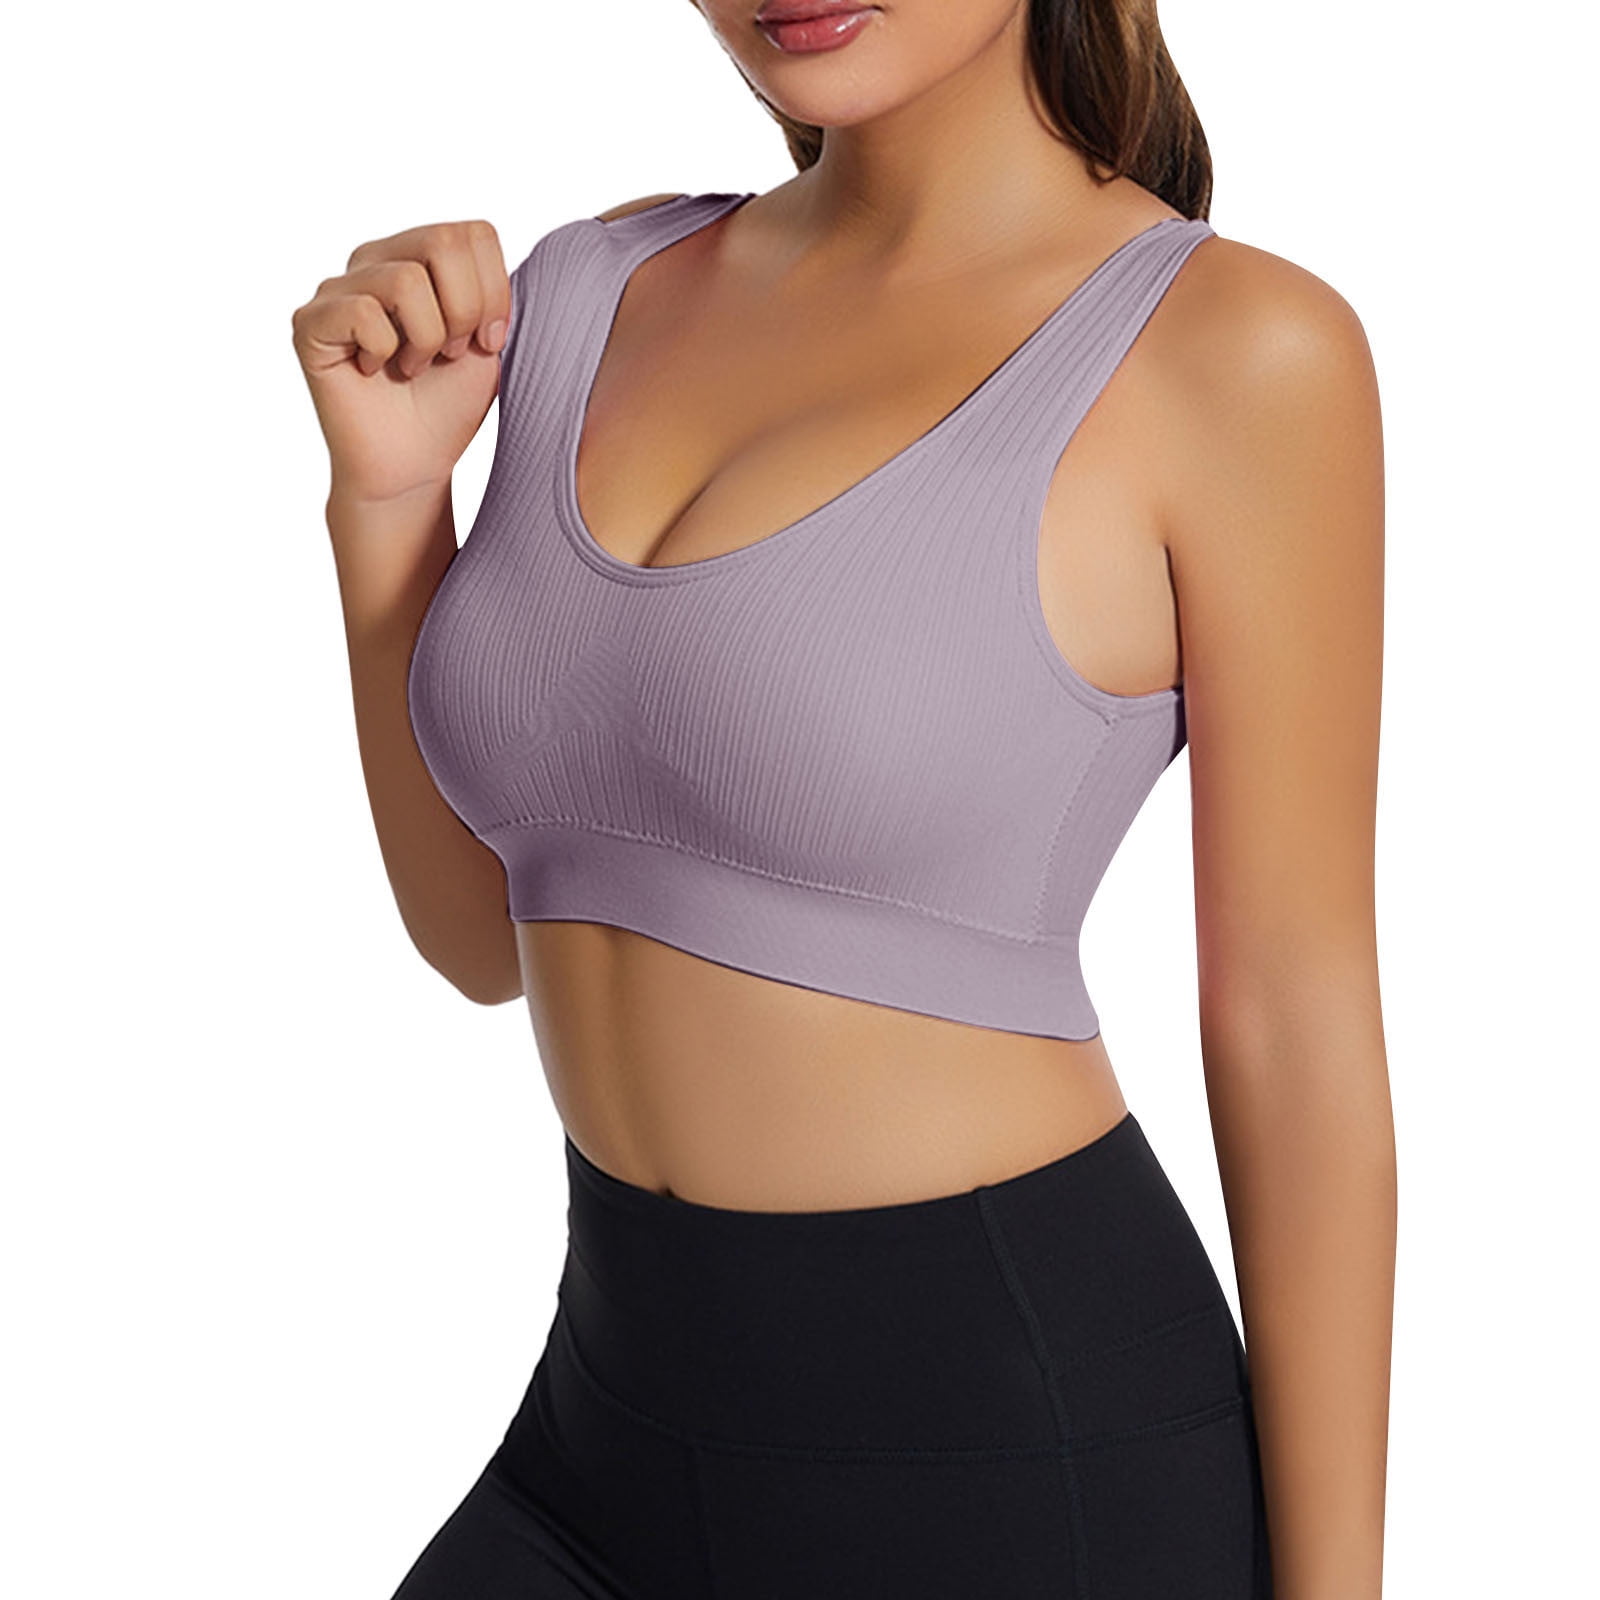 CAICJ98 Lingerie for Women Yoga Tank Tops for Women Built in Shelf Bra B/C  Cups Strappy Back Activewear Workout Compression Tops D,6XL 